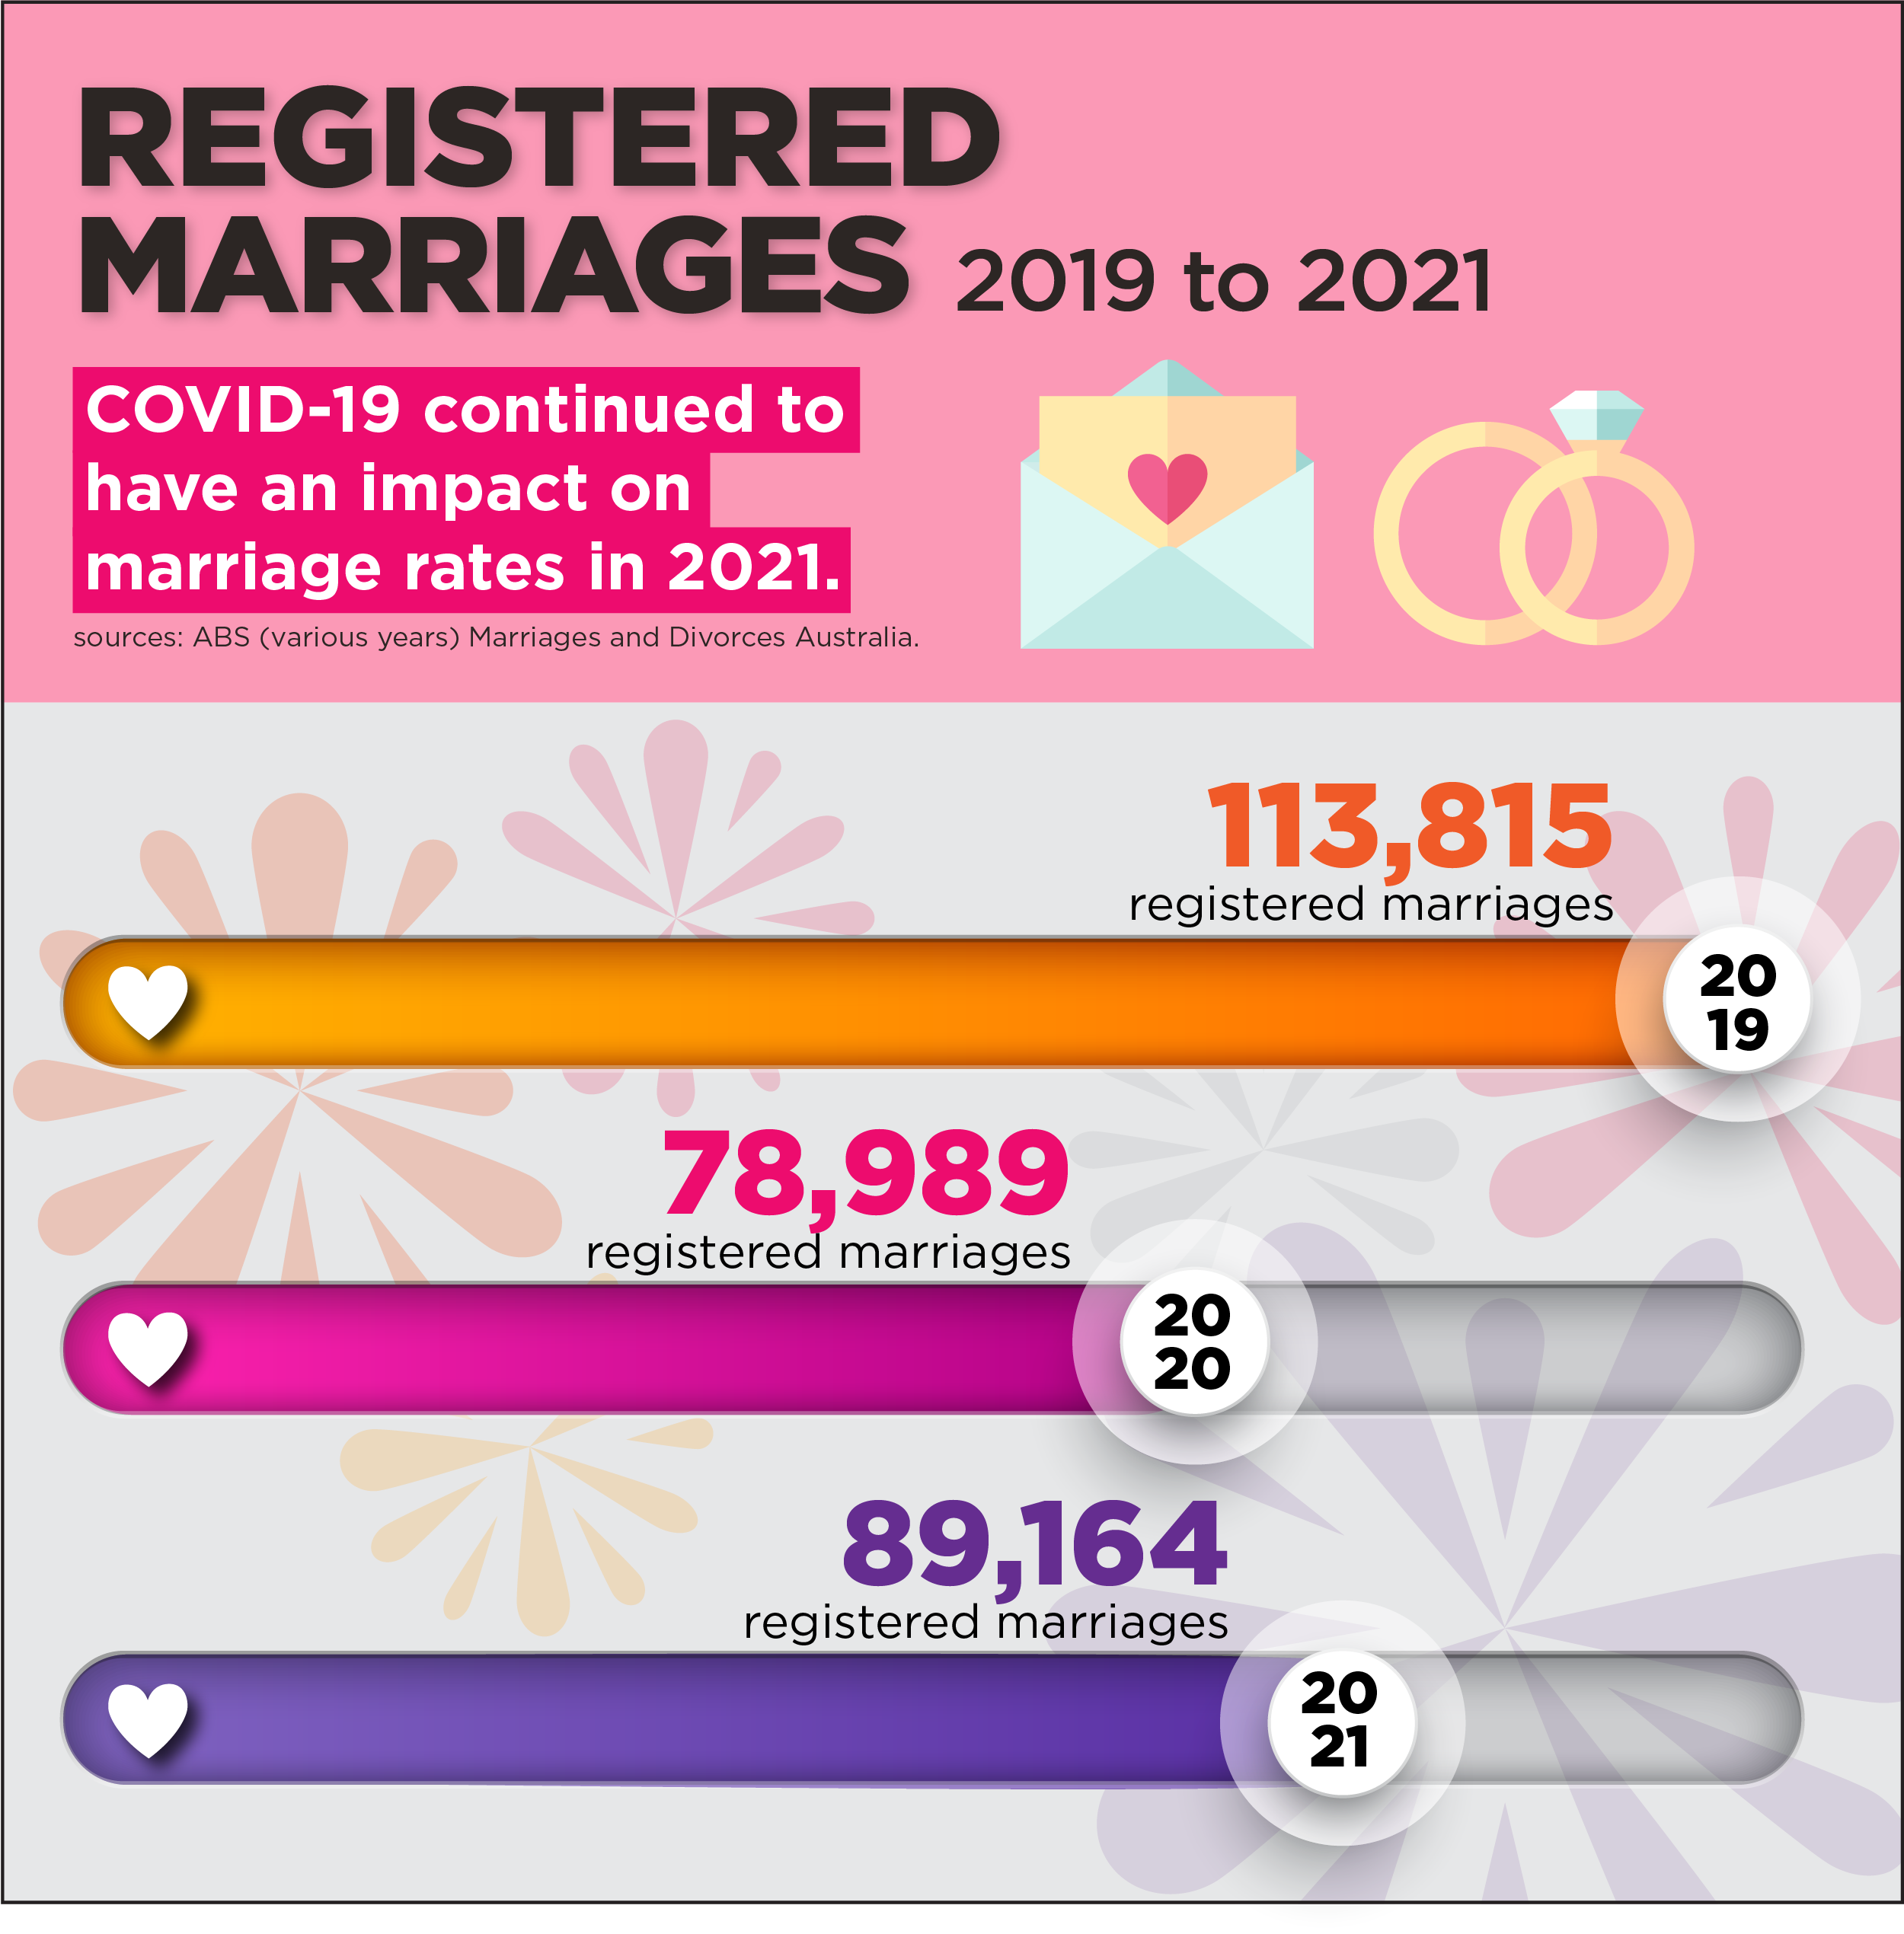 Registered marriages 2019 to 2021 - COVID-19 continued to have an impact on marriage rates in 2021; 2019: 113, 815 registered marriages; 2020: 78,989 registered marriages; 2021: 80,164 registered marriages.